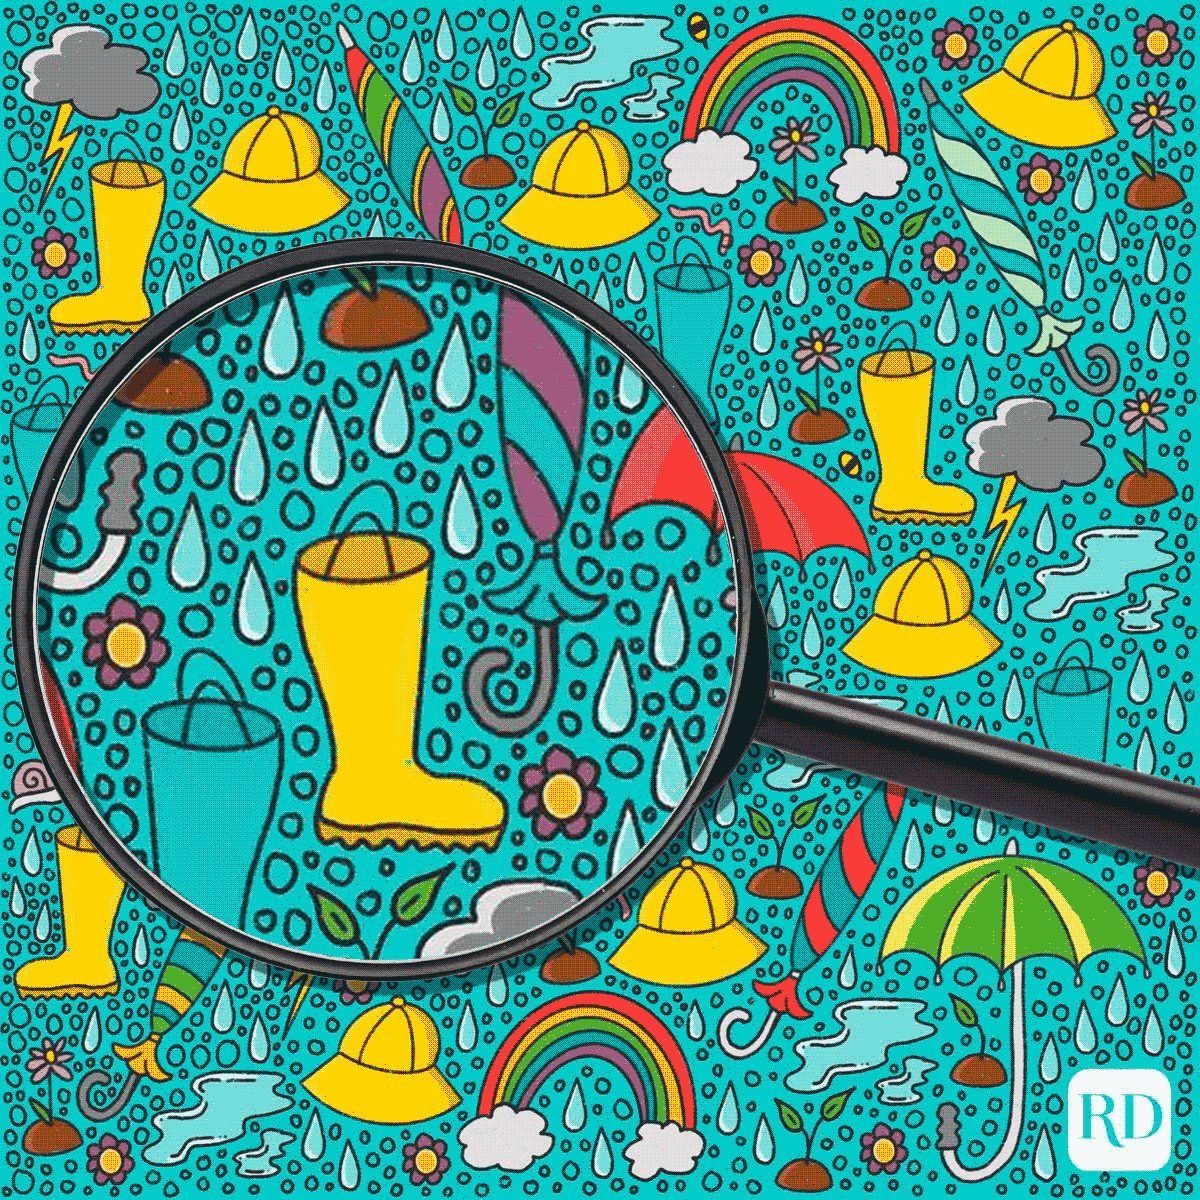 Find the Hidden Objects: 36 Tricky Hidden Objects in Pictures